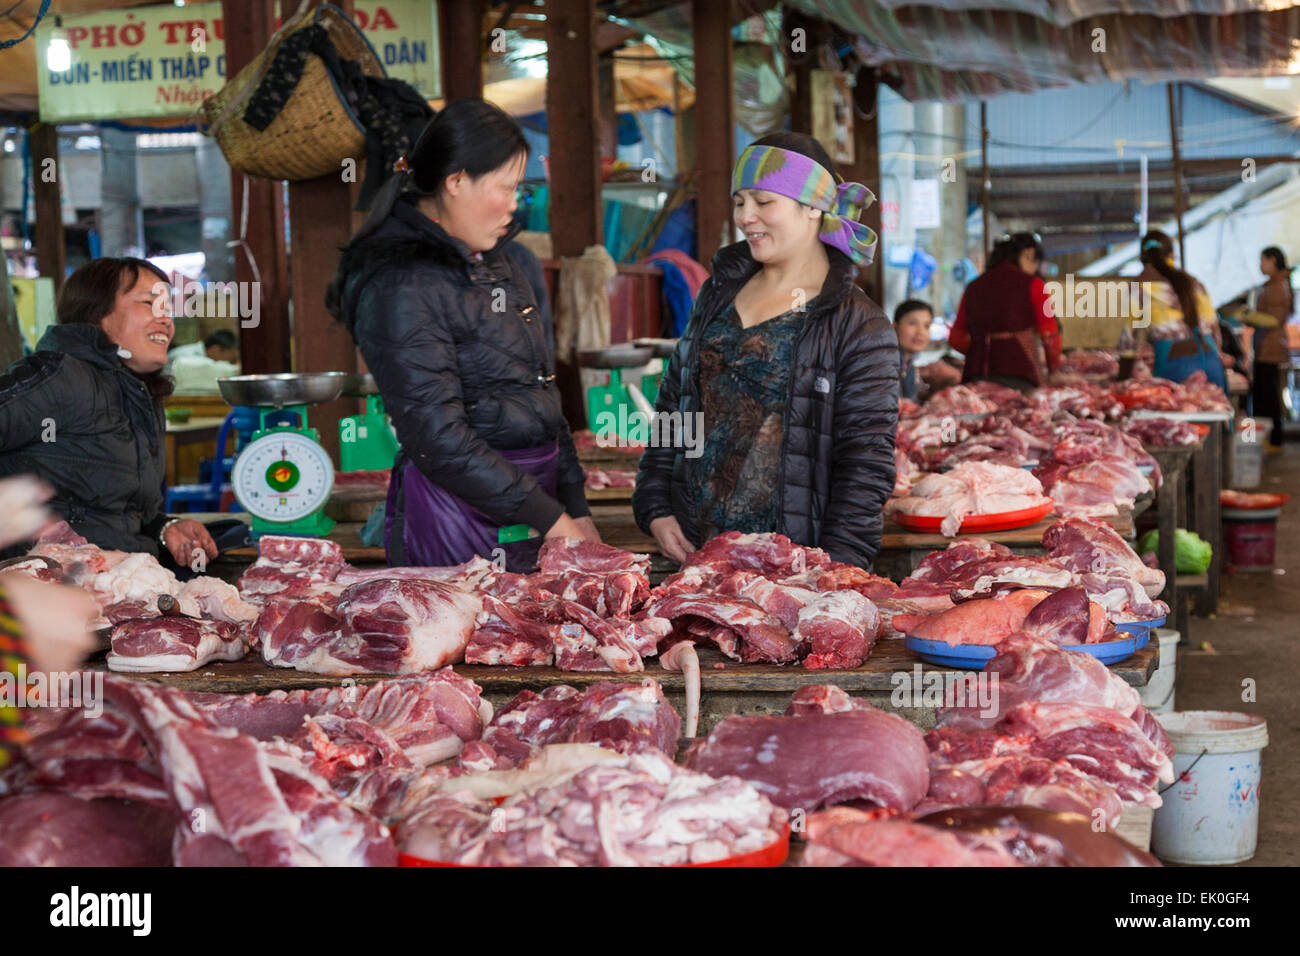 The market in the mountain town of Sa Pa in Northern Vietnam Stock Photo